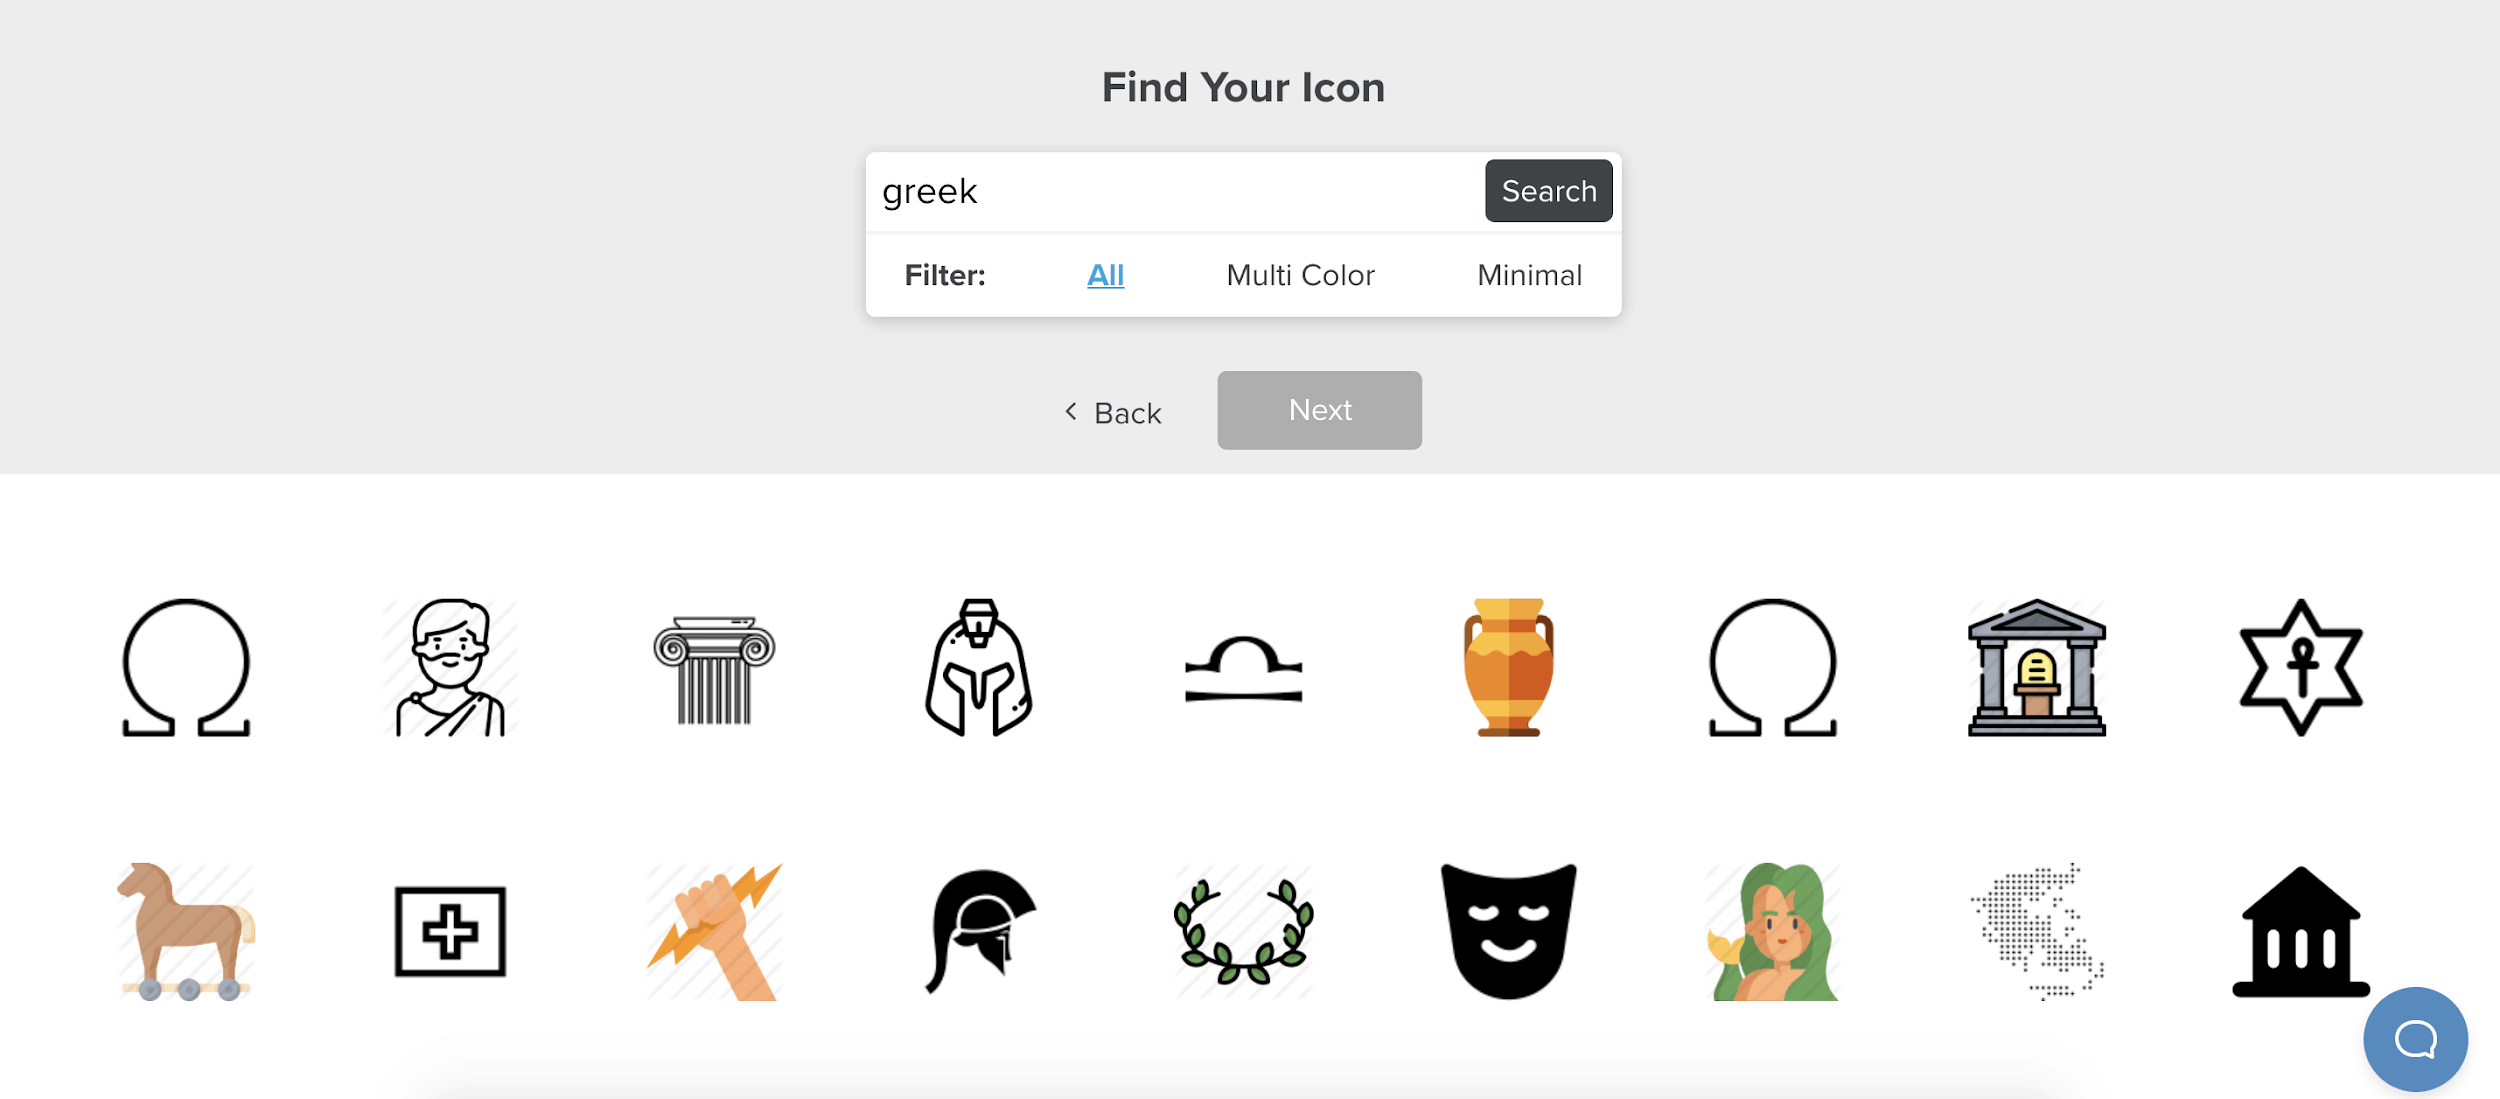 Tailor Brands screenshot - Icon Library